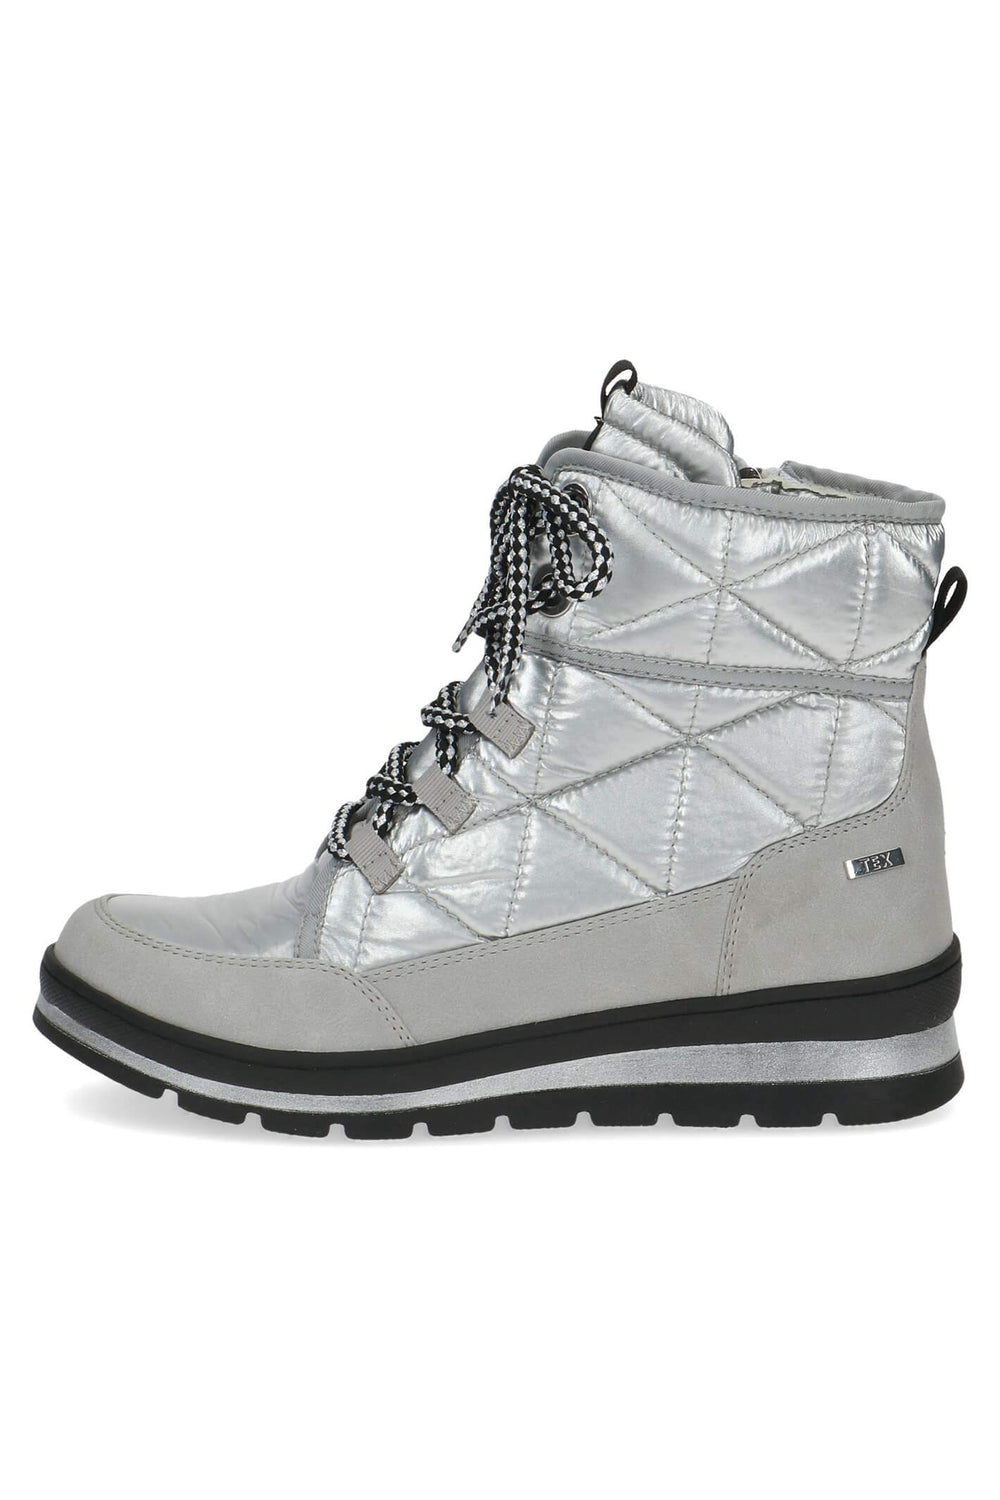 Caprice Holy 26209 Silver Waterproof Snow Boots - Experience Boutique